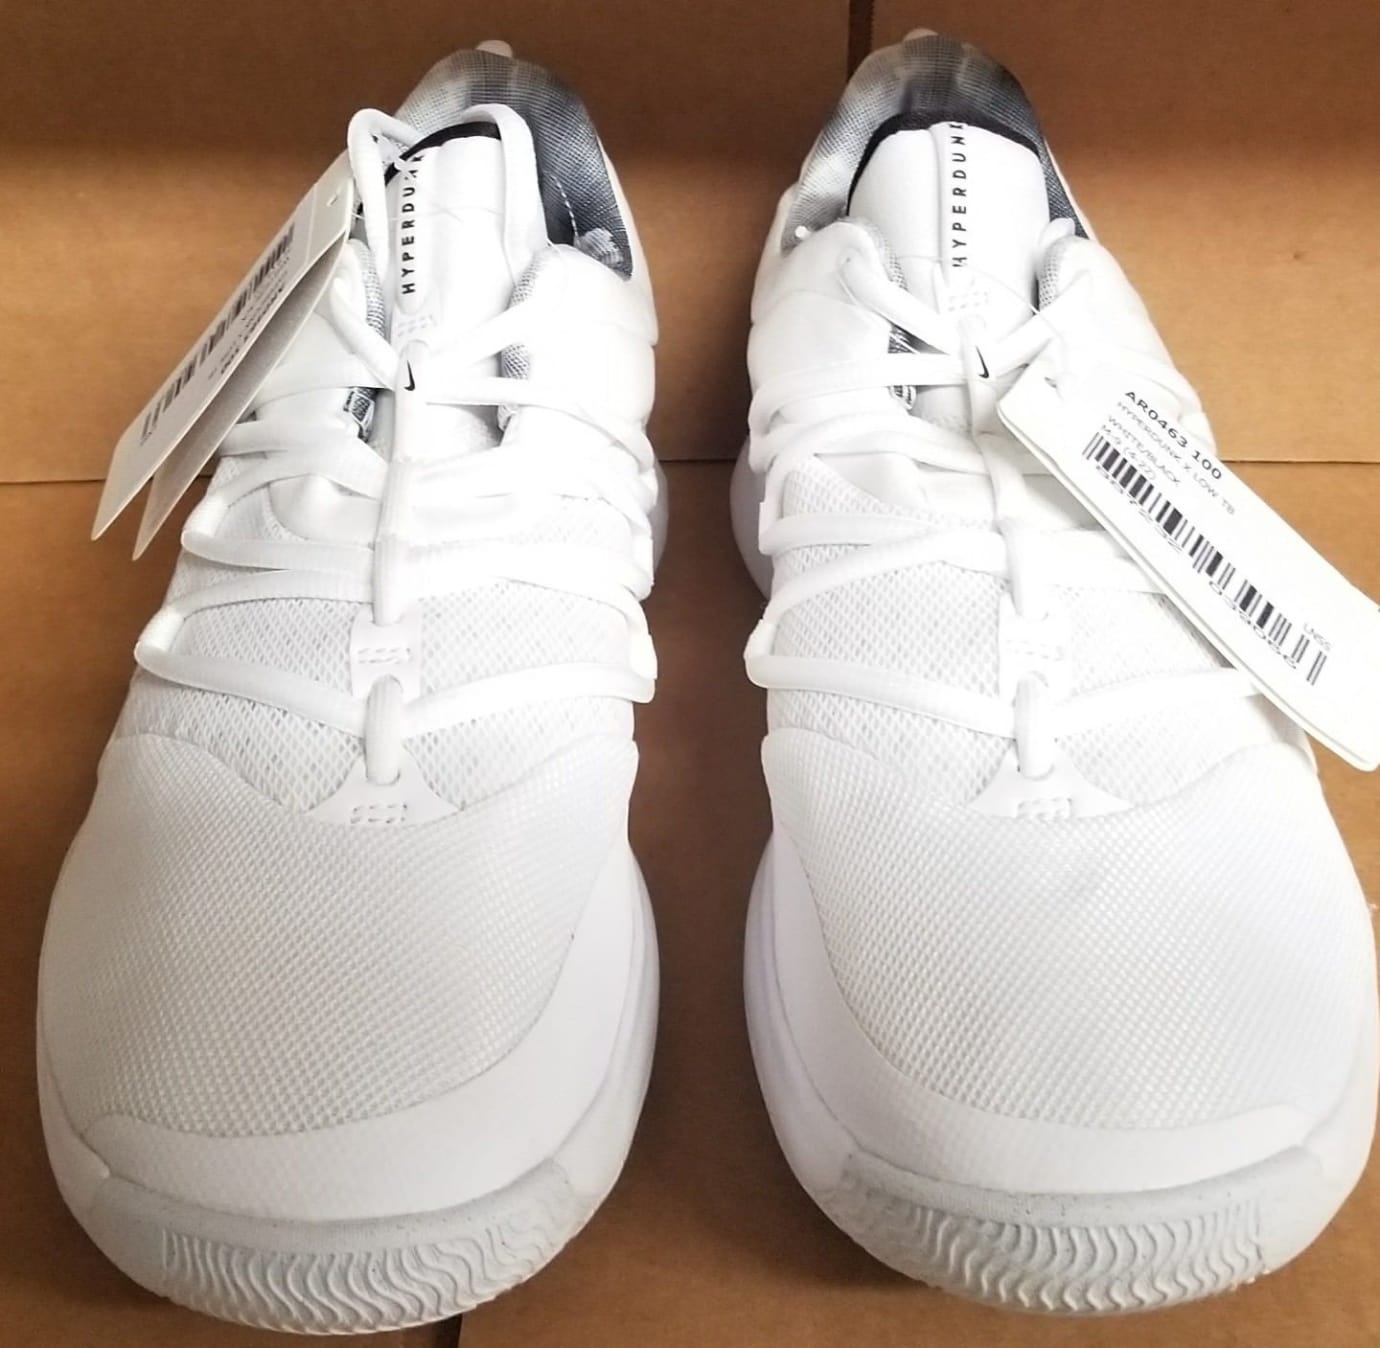 Humility Anyways writing Nike Hyperdunk X Low TB White/Black AR0463-100 Images | Sole Collector